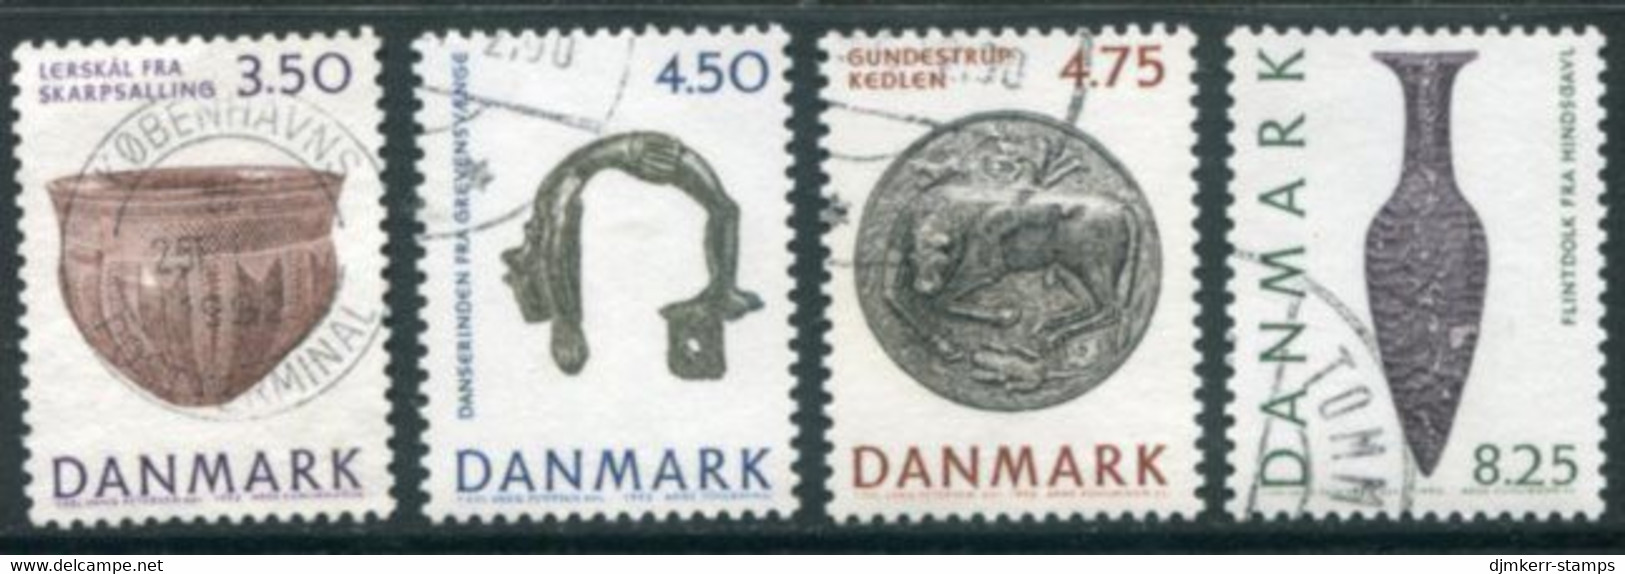 DENMARK 1992 Re-opening Of National Museum Used.   Michel 1018-21 - Used Stamps